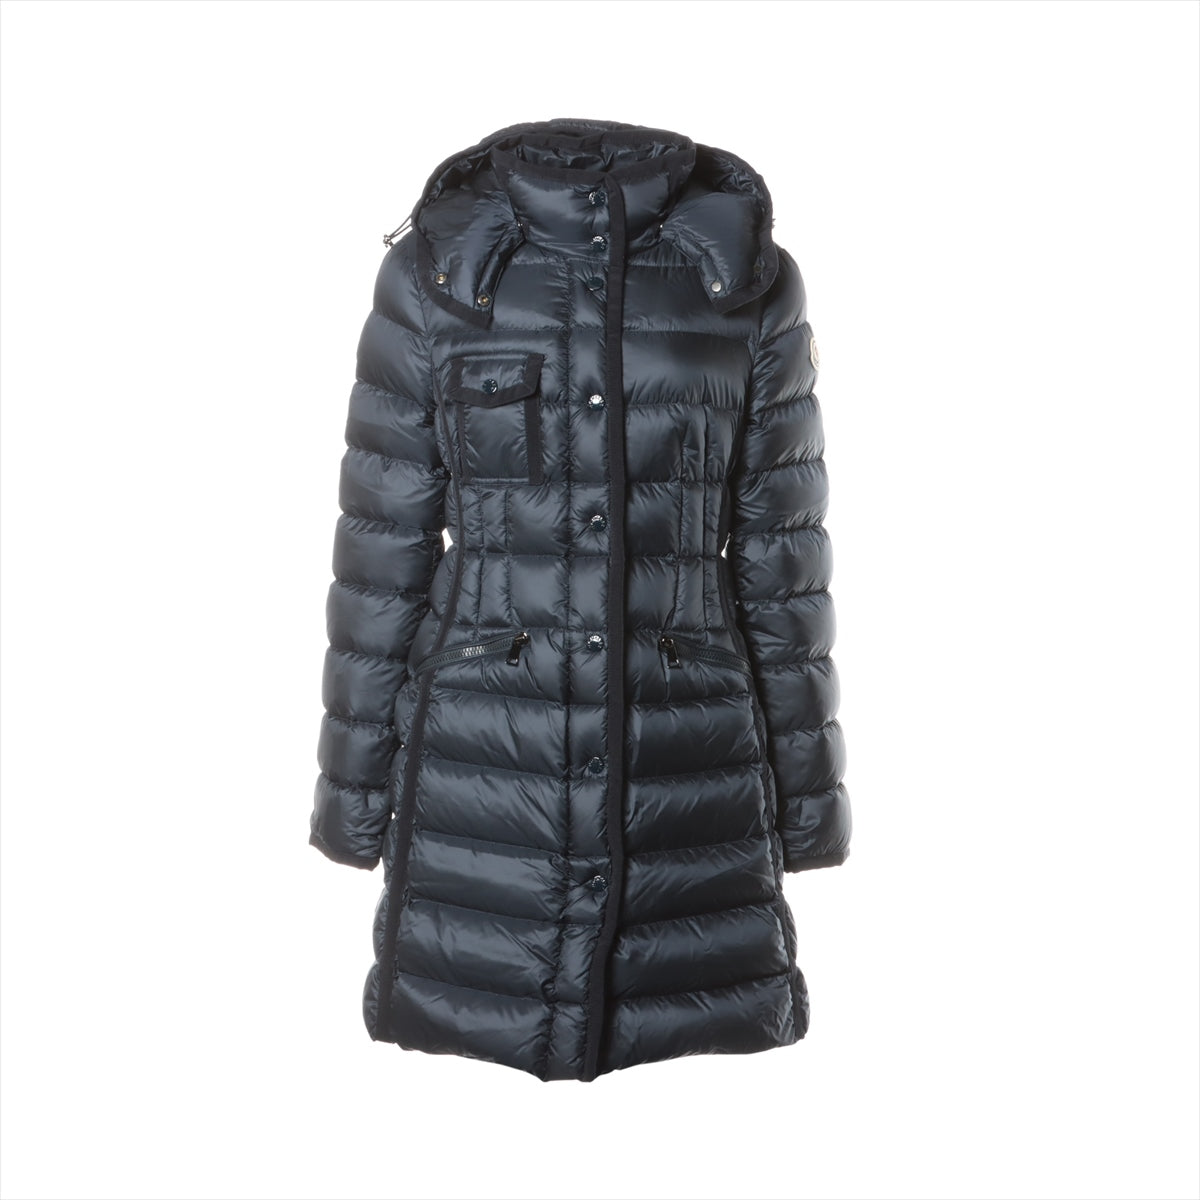 Moncler HERMINE 18 years Nylon Down coat 1 Ladies' Navy blue Removable